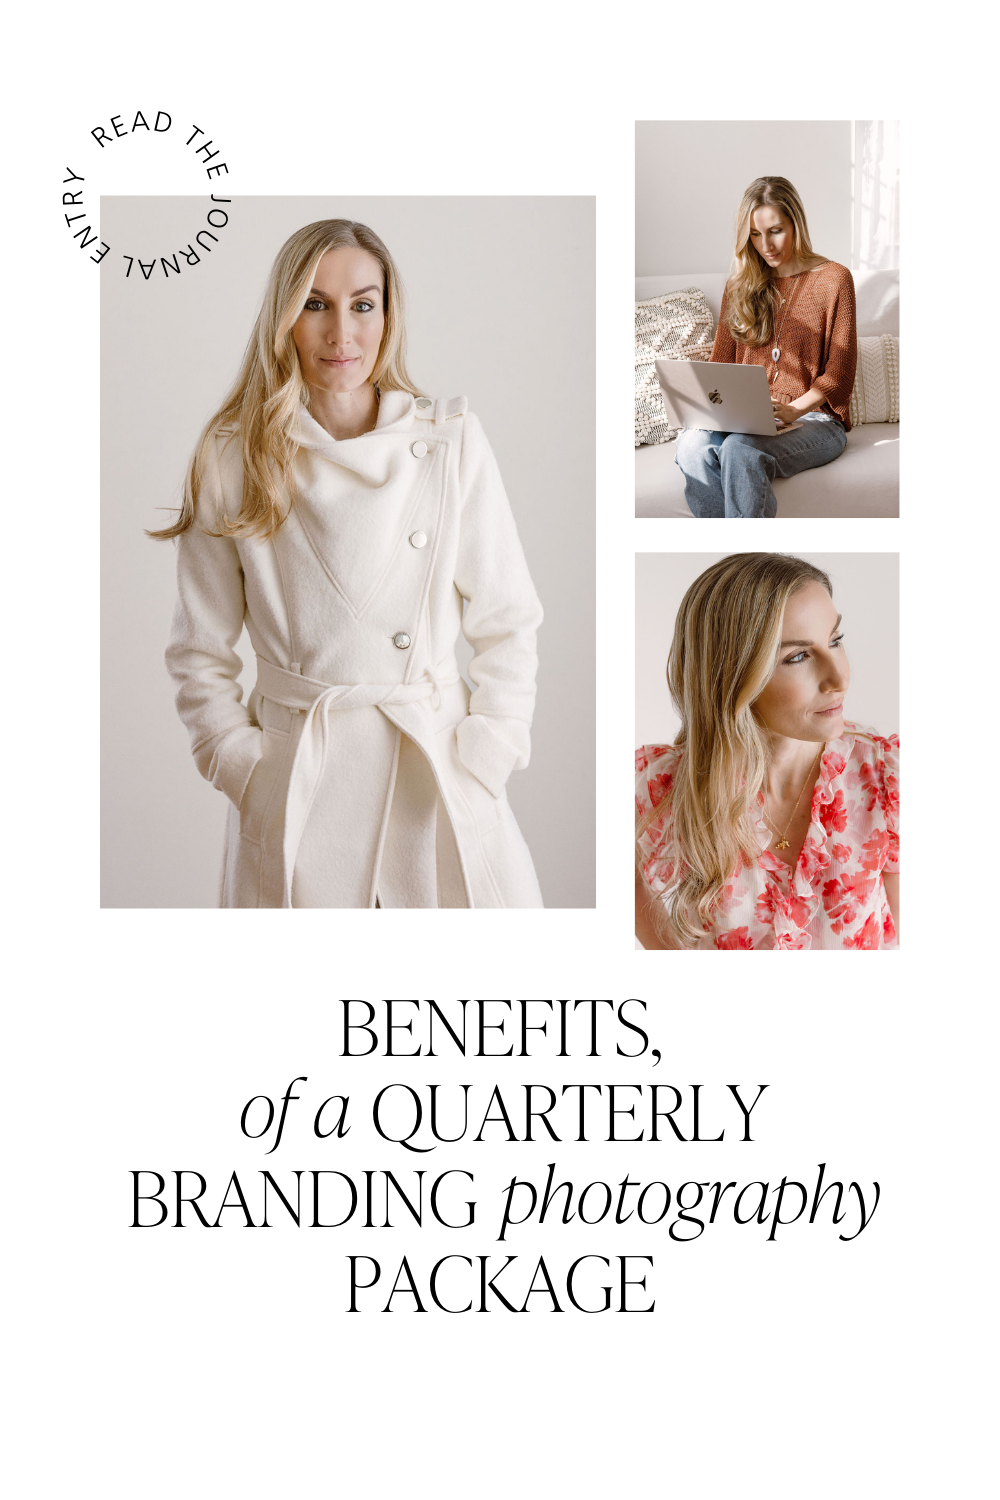 Benefits of a quarterly branding Photography package